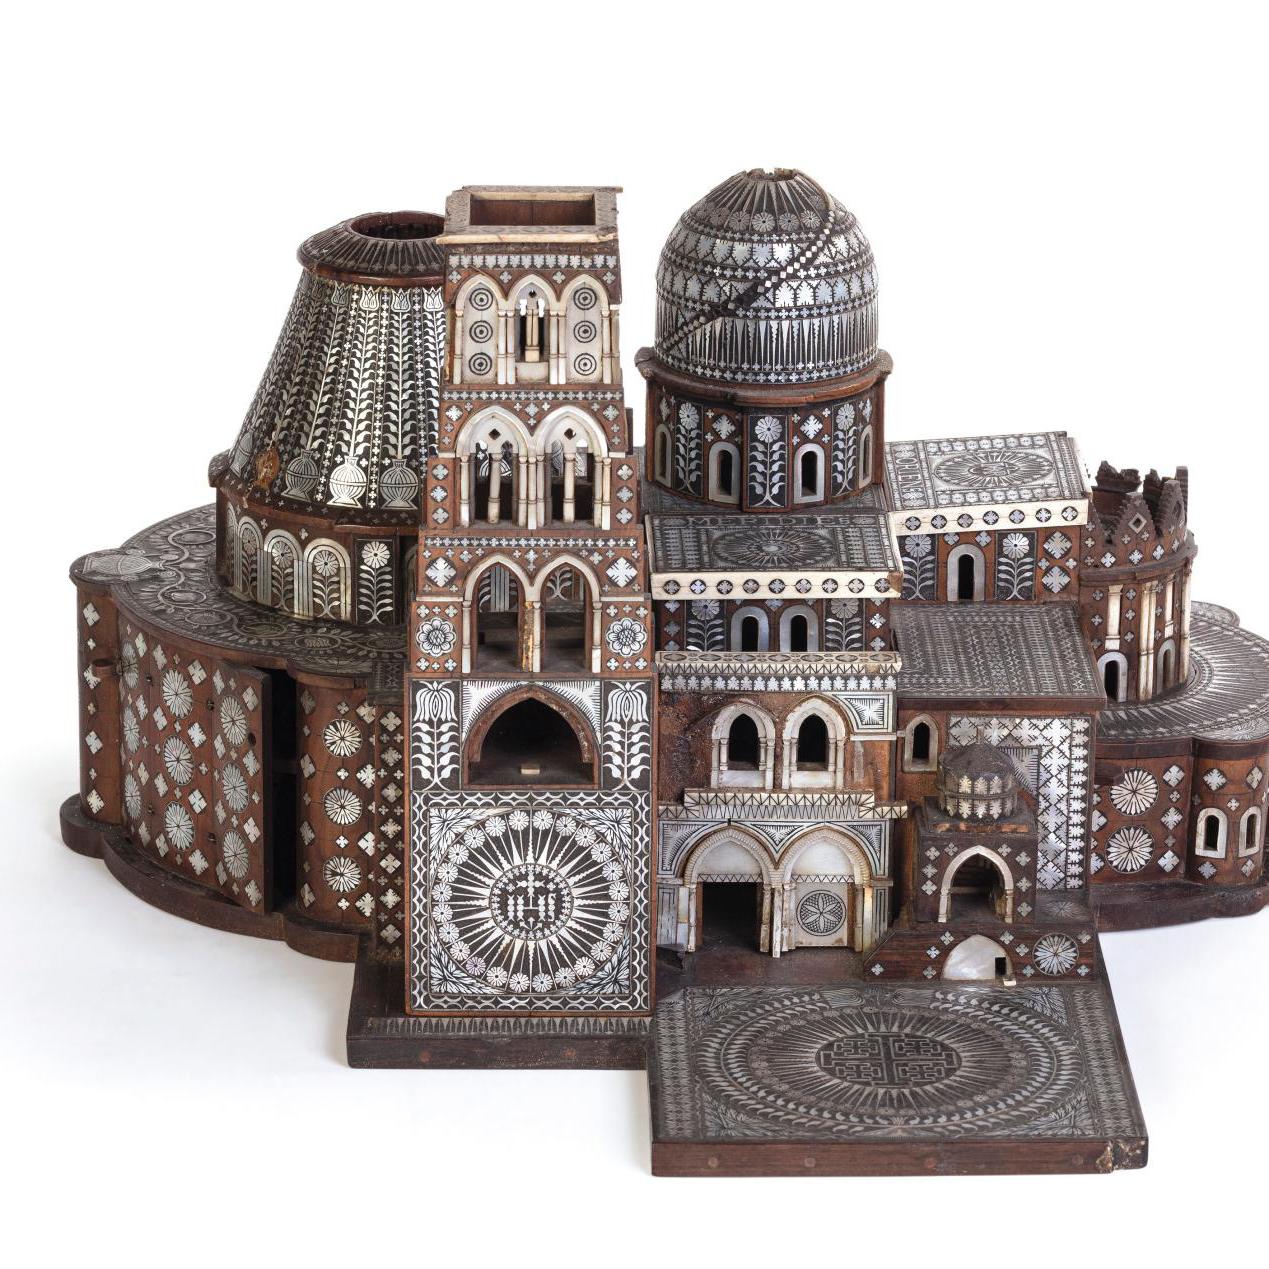 Rare Model of Holy Sepulchre Captivates Bidders - Lots sold